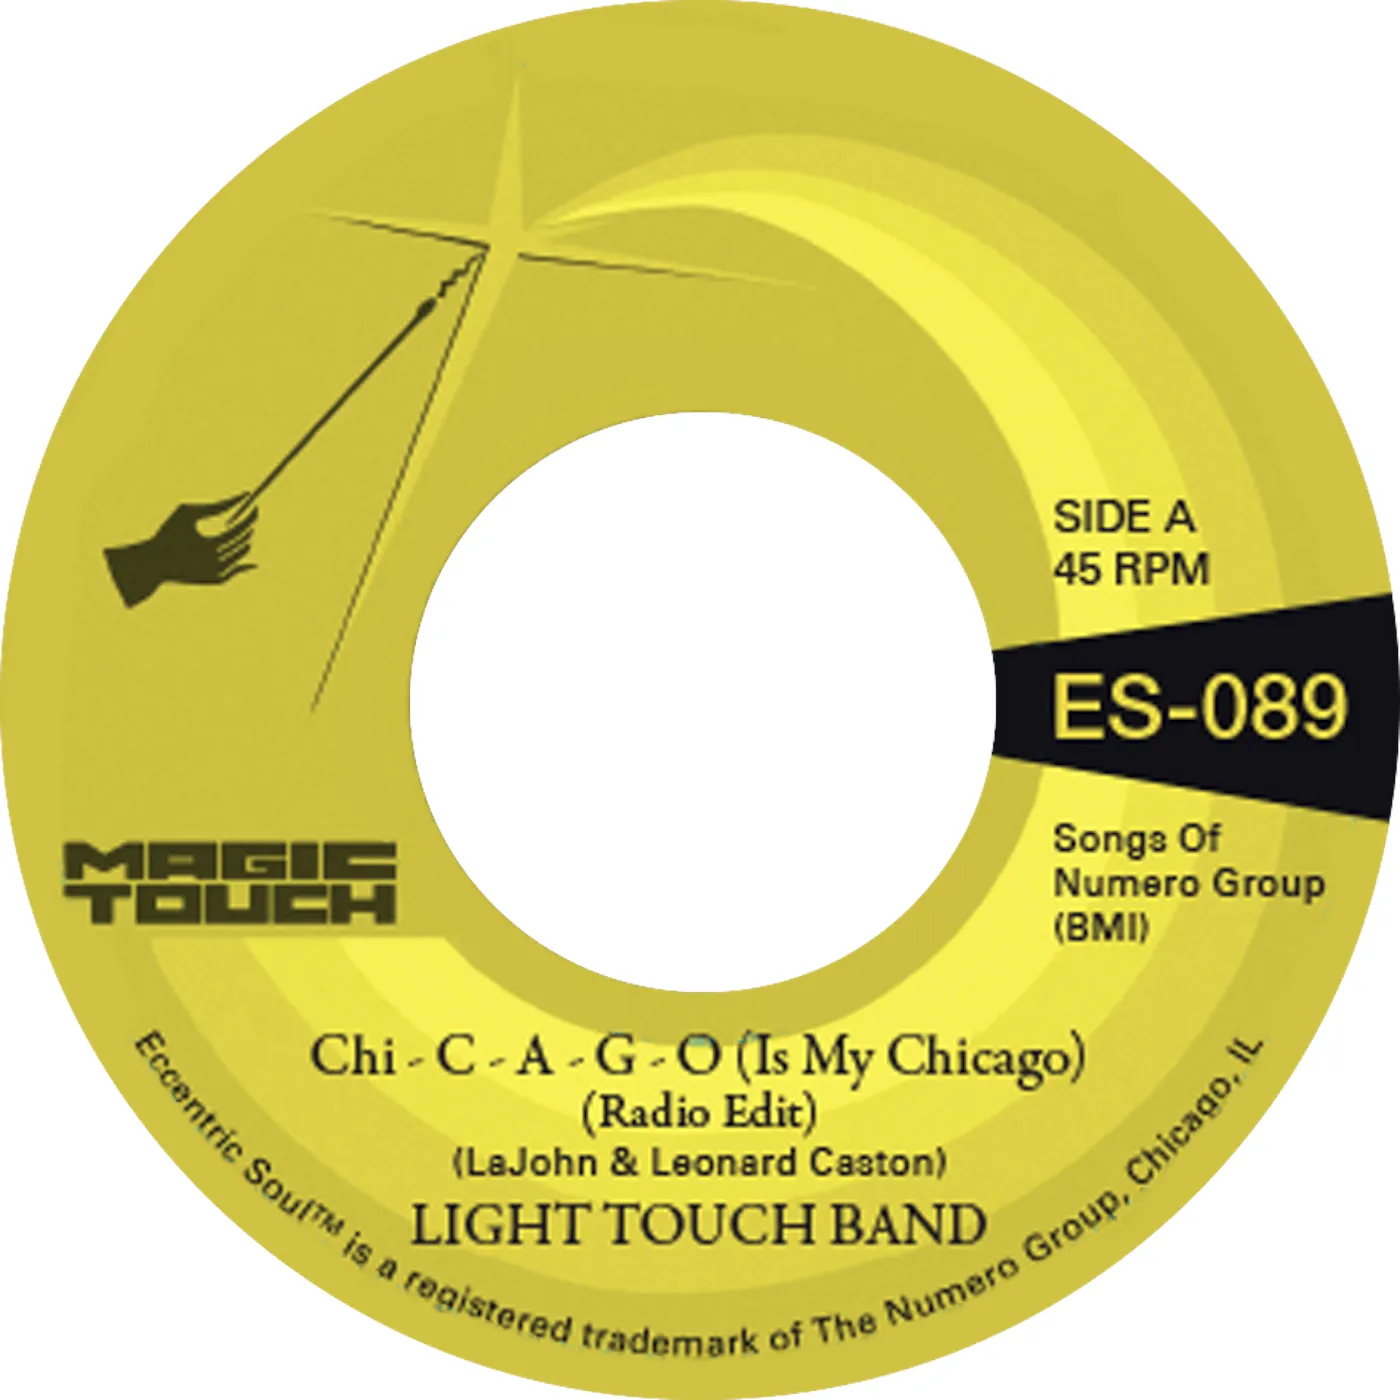 Light Touch Band & Magic Touch - Chi - C - A - G - O (Is My Chicago) b/w Sexy Lady (Radio Edit) : 7inch